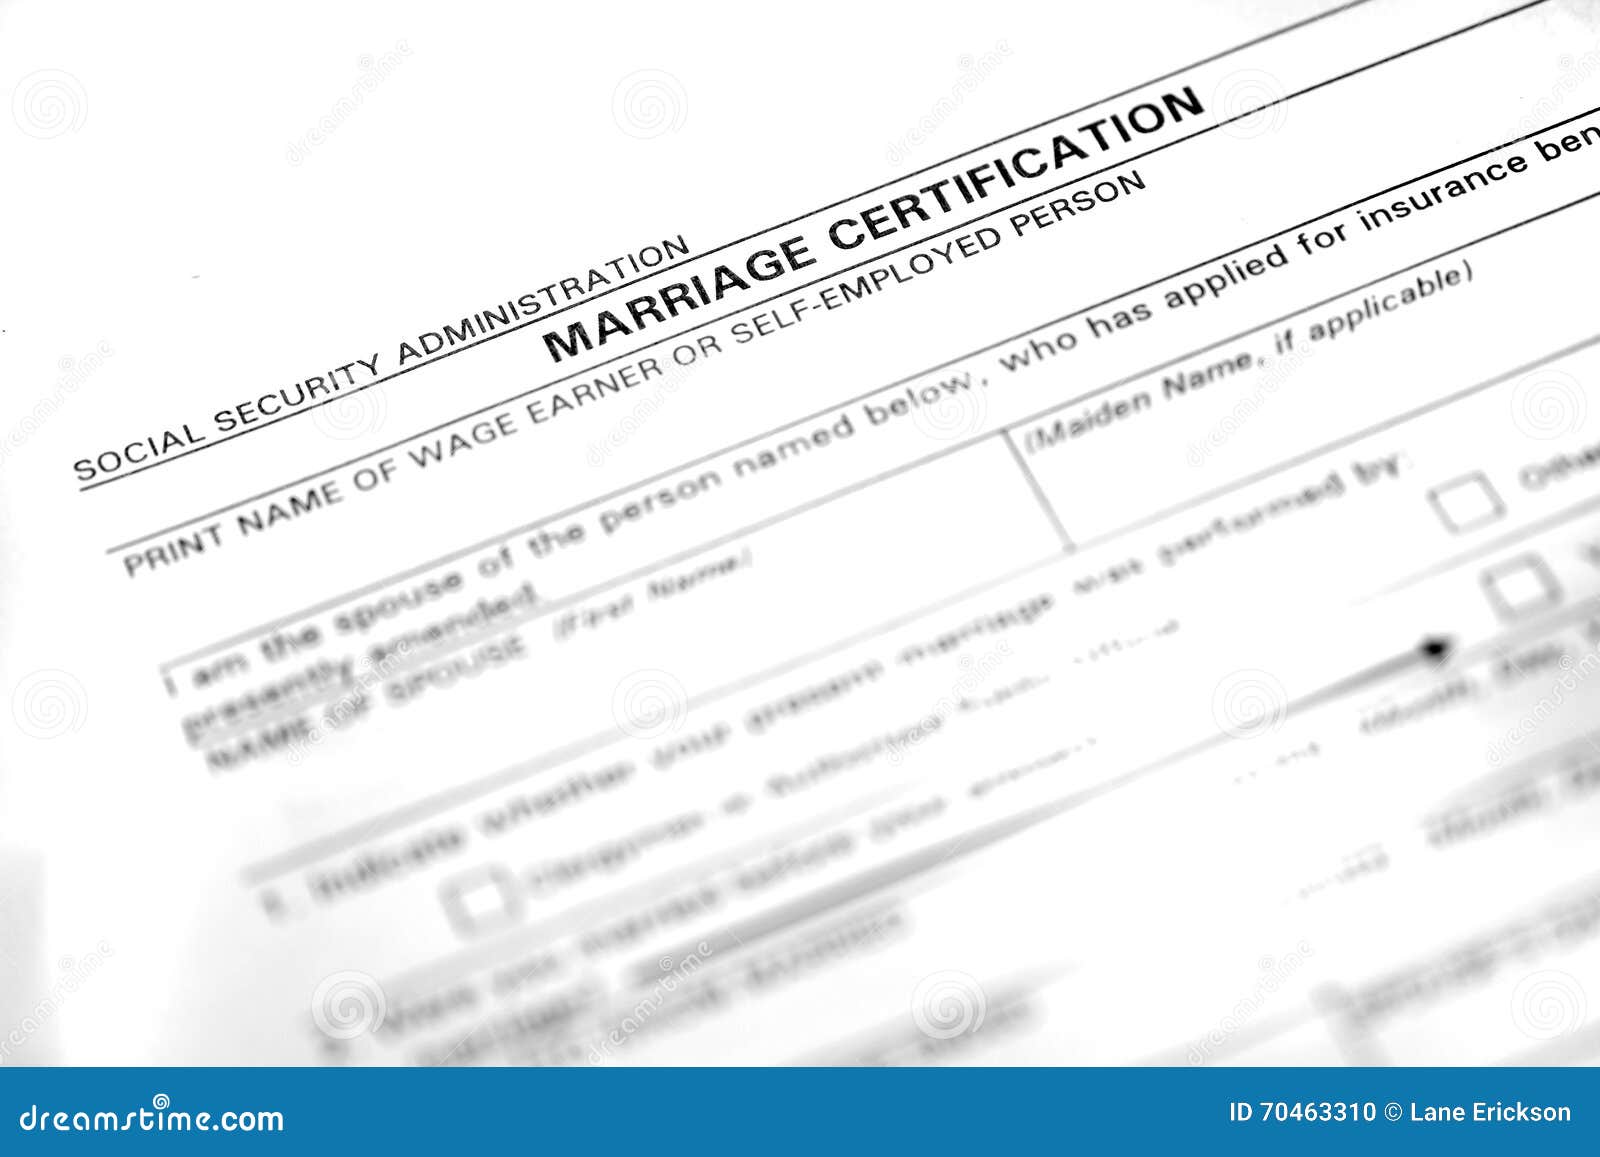 marriage certificate form